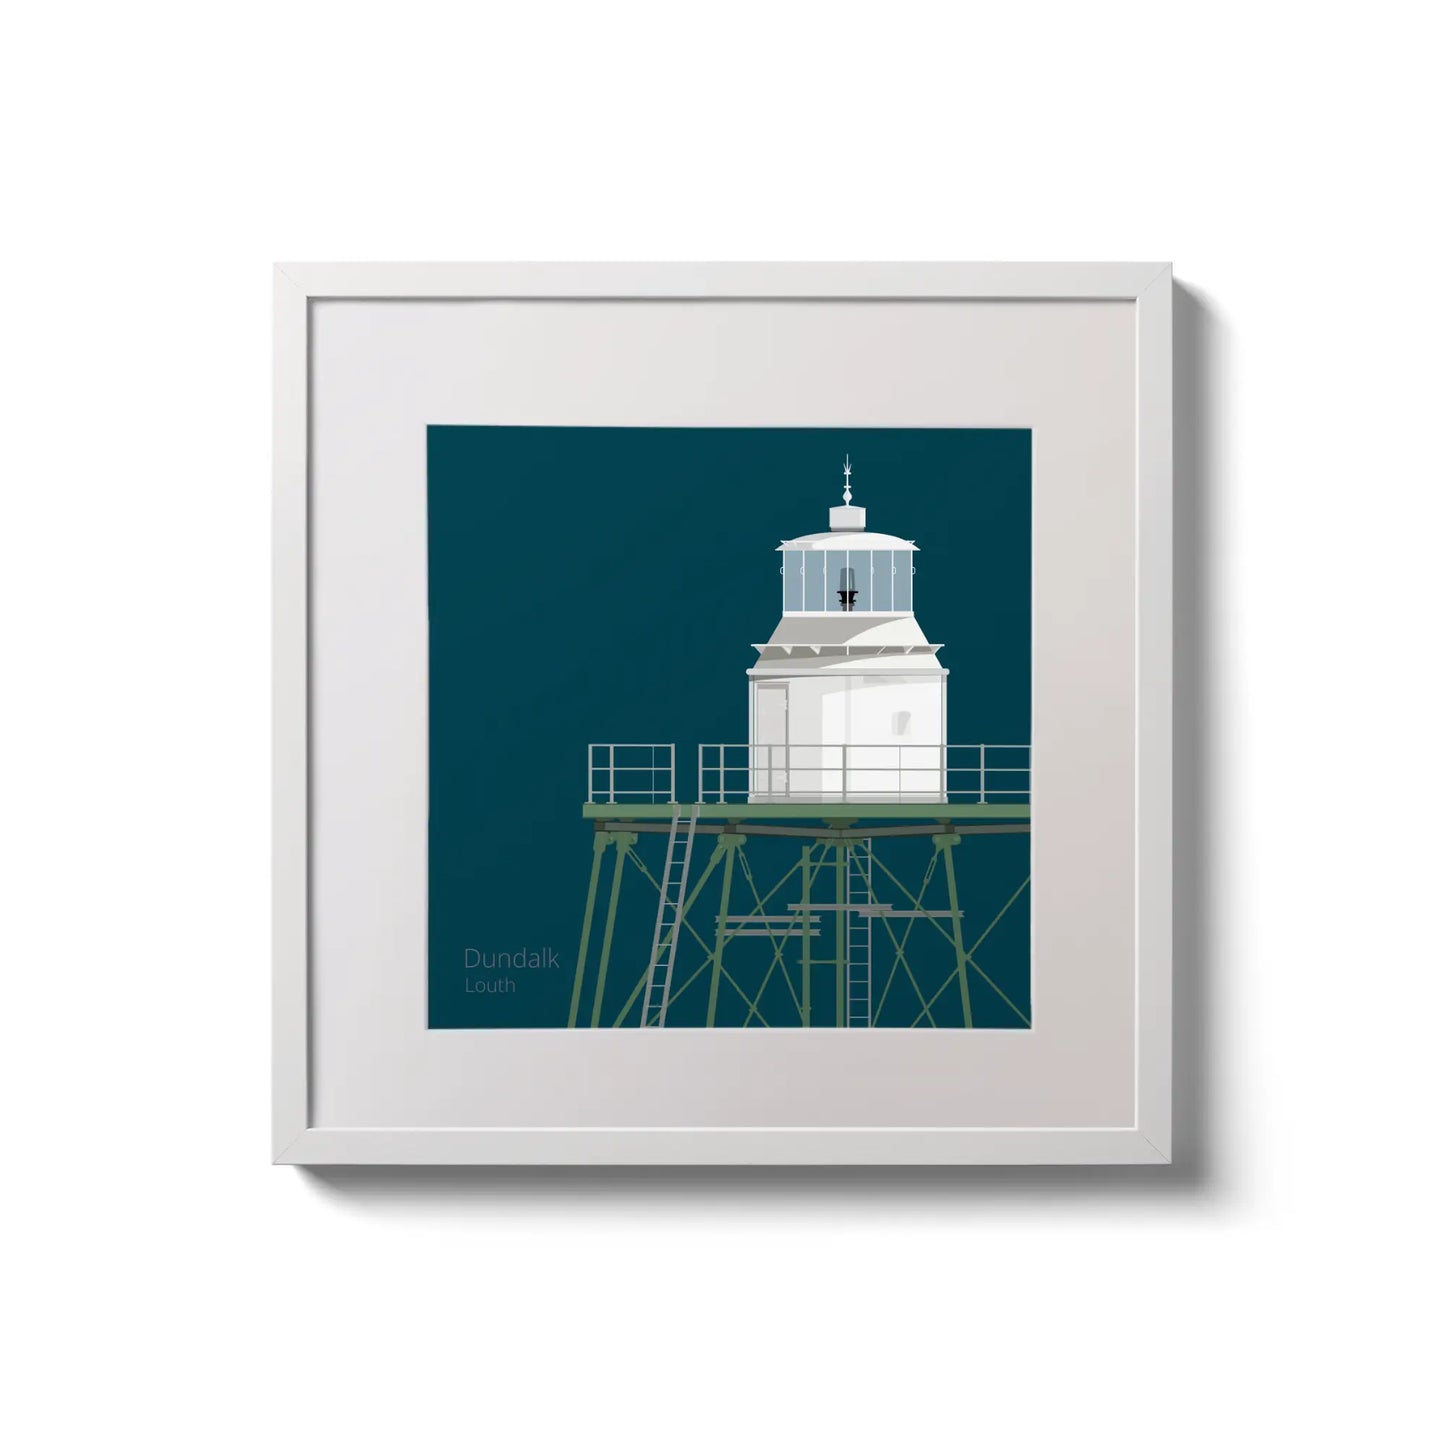 Framed wall art decoration  Dundalk lighthouse on a midnight blue background,  in a white square frame measuring 20x20cm.